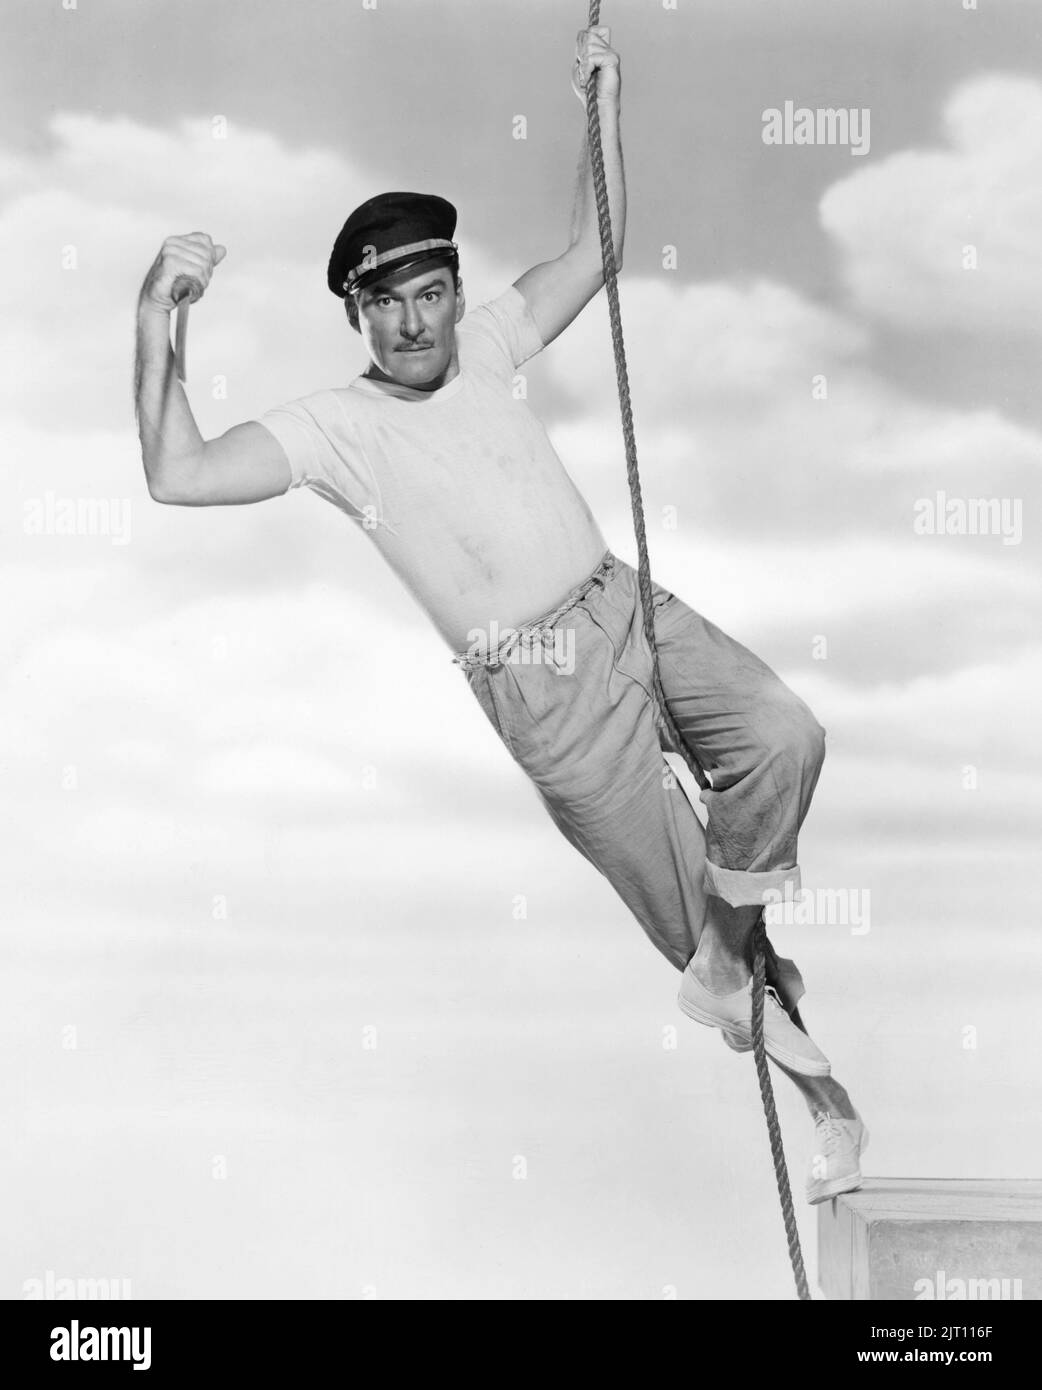 Errol Flynn. Australian-American actor. 20 june 1909 - 14 october 1959. He achieved wordwide fame during the Golden age of Hollywood, known for his romantic swashbuckler roles. Pictured when starring in the 1951 movie Adventures of captain Fabian. Stock Photo